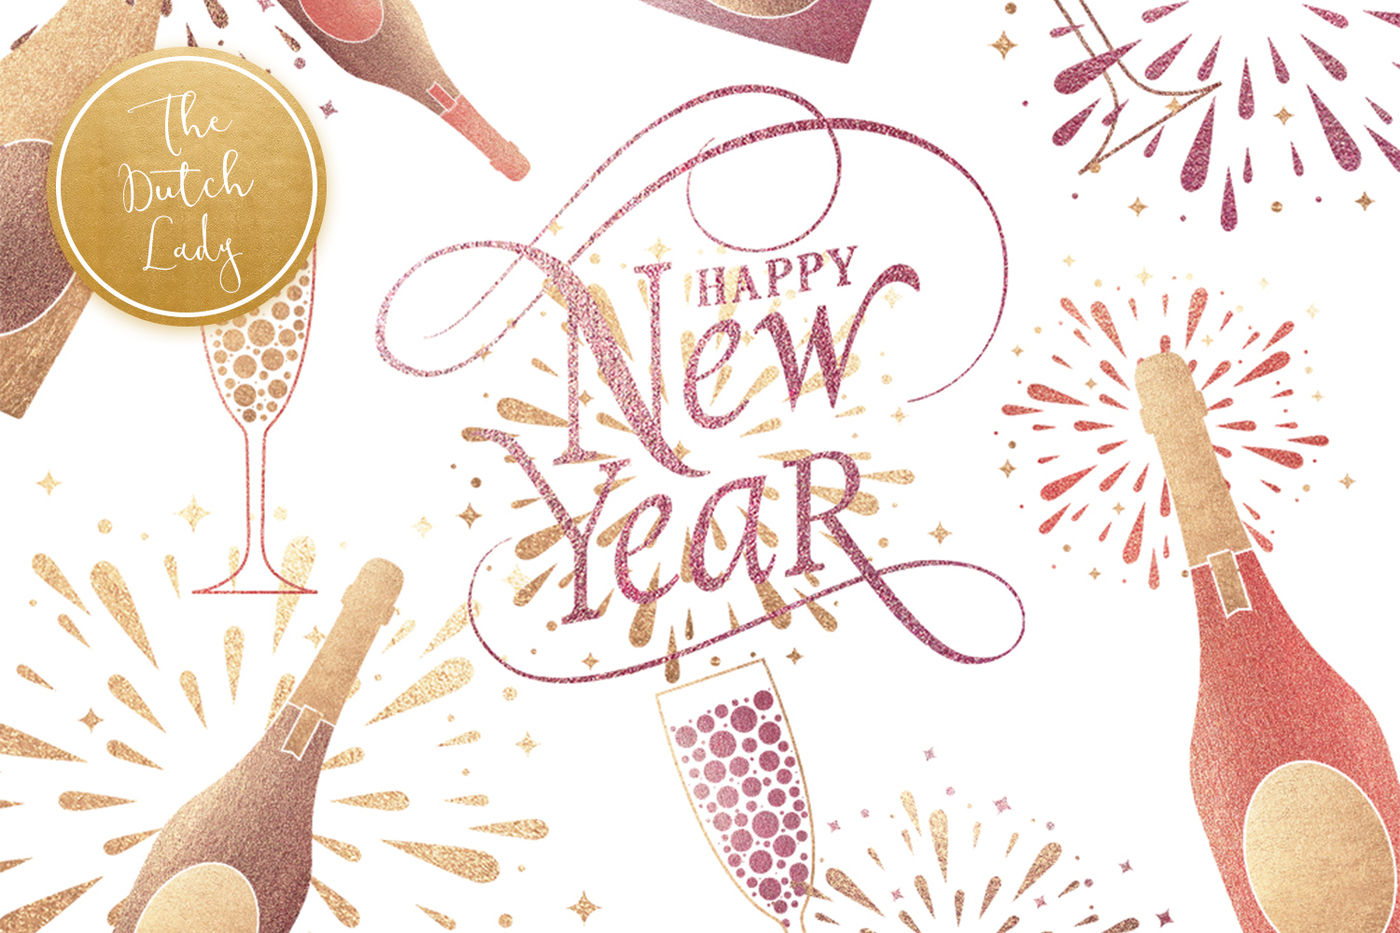 Happy New Year & Party Clipart Set By The Dutch Lady Designs